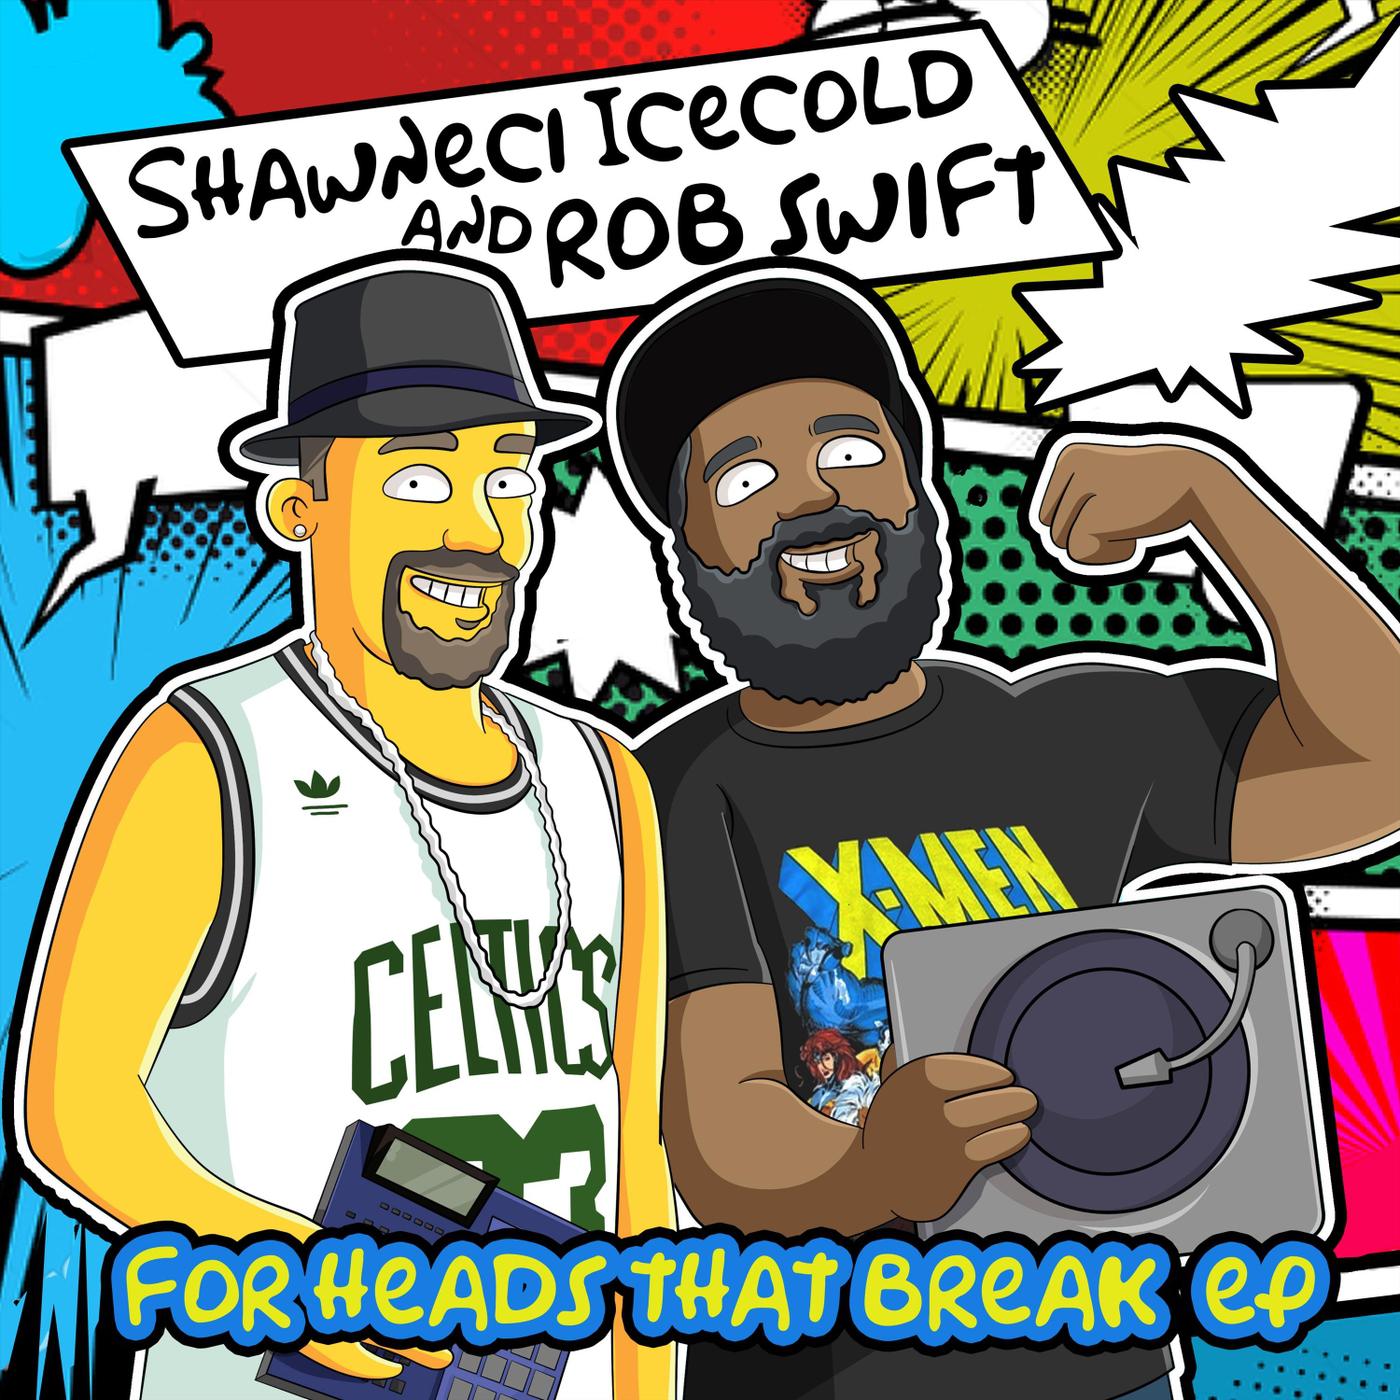 Shawneci Icecold - A-List Material